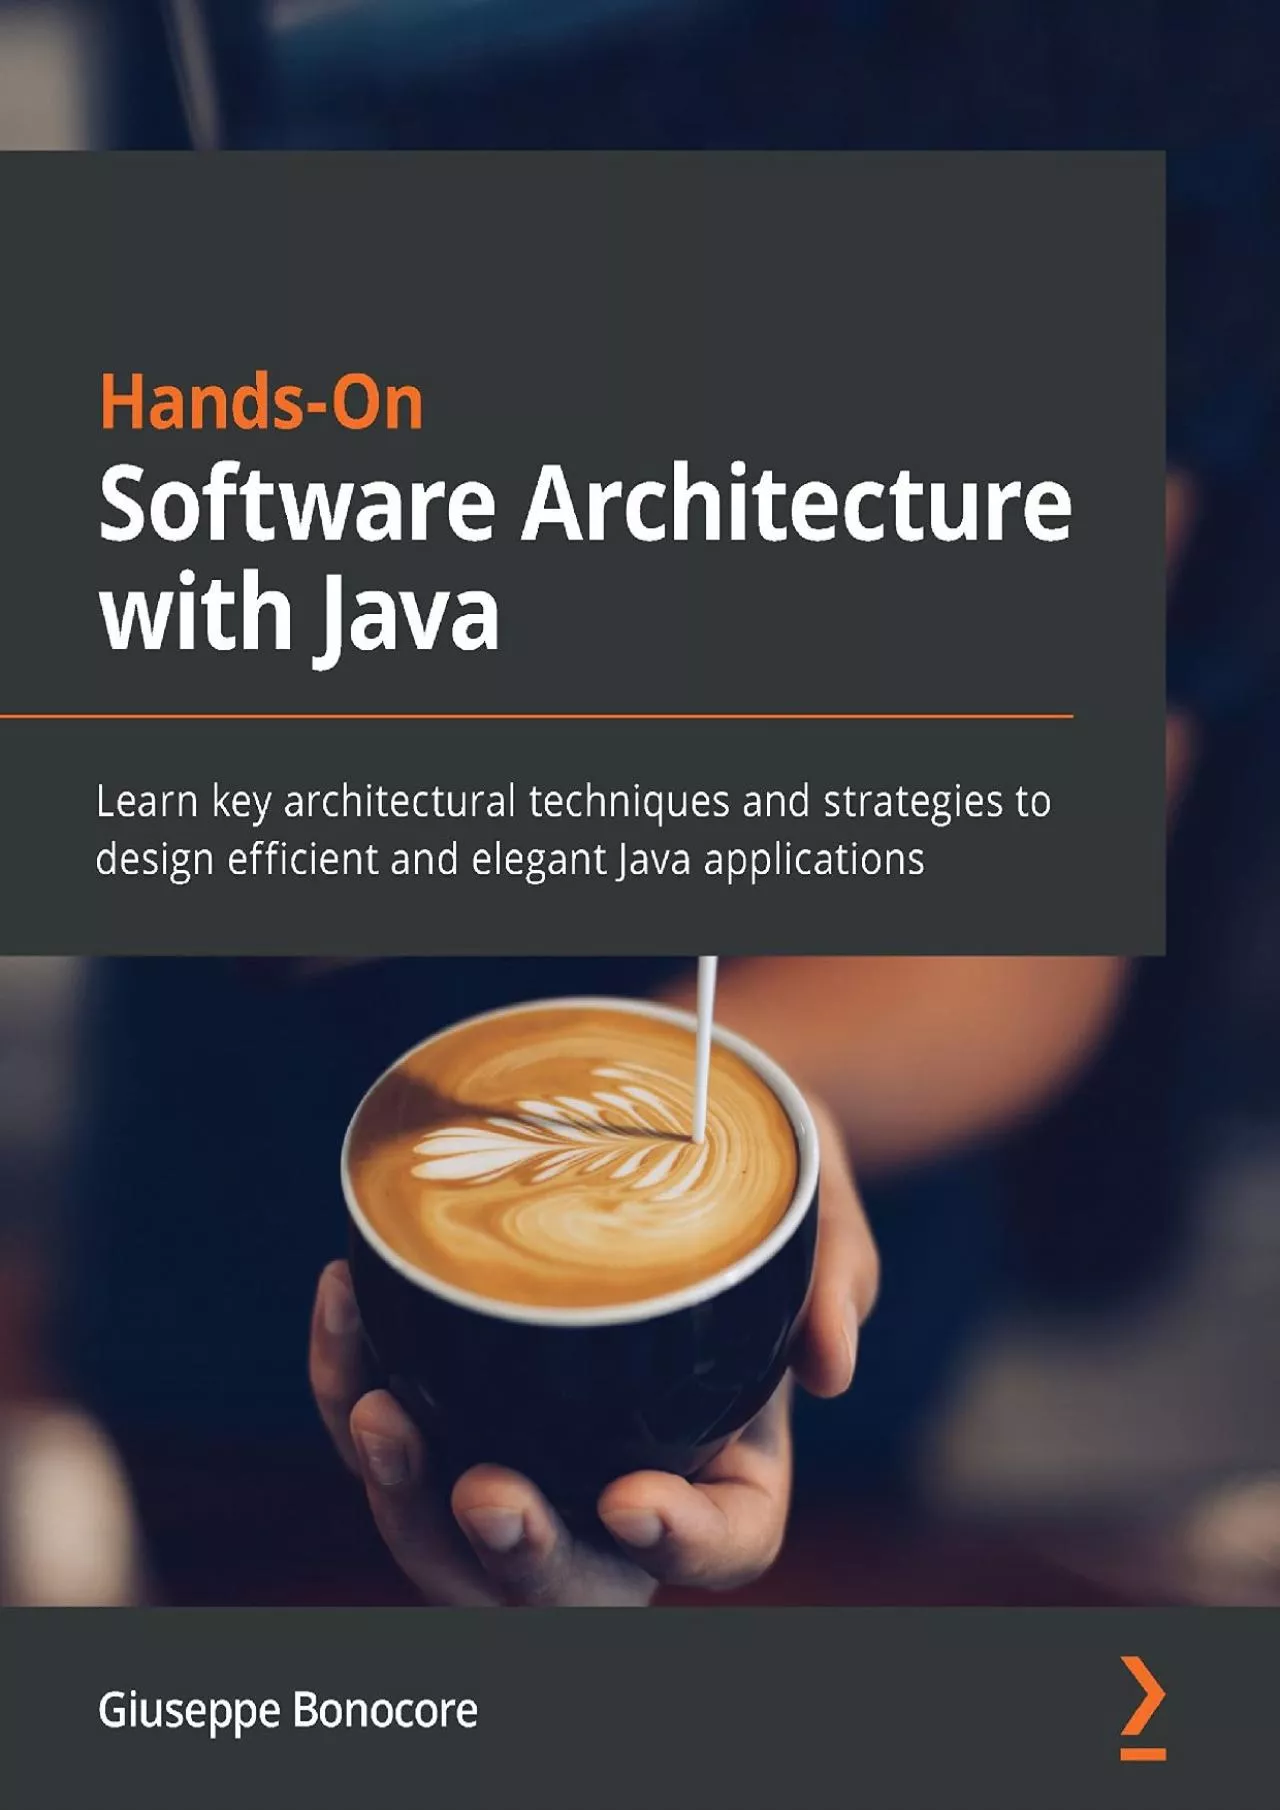 [READ]-Hands-On Software Architecture with Java: Learn key architectural techniques and